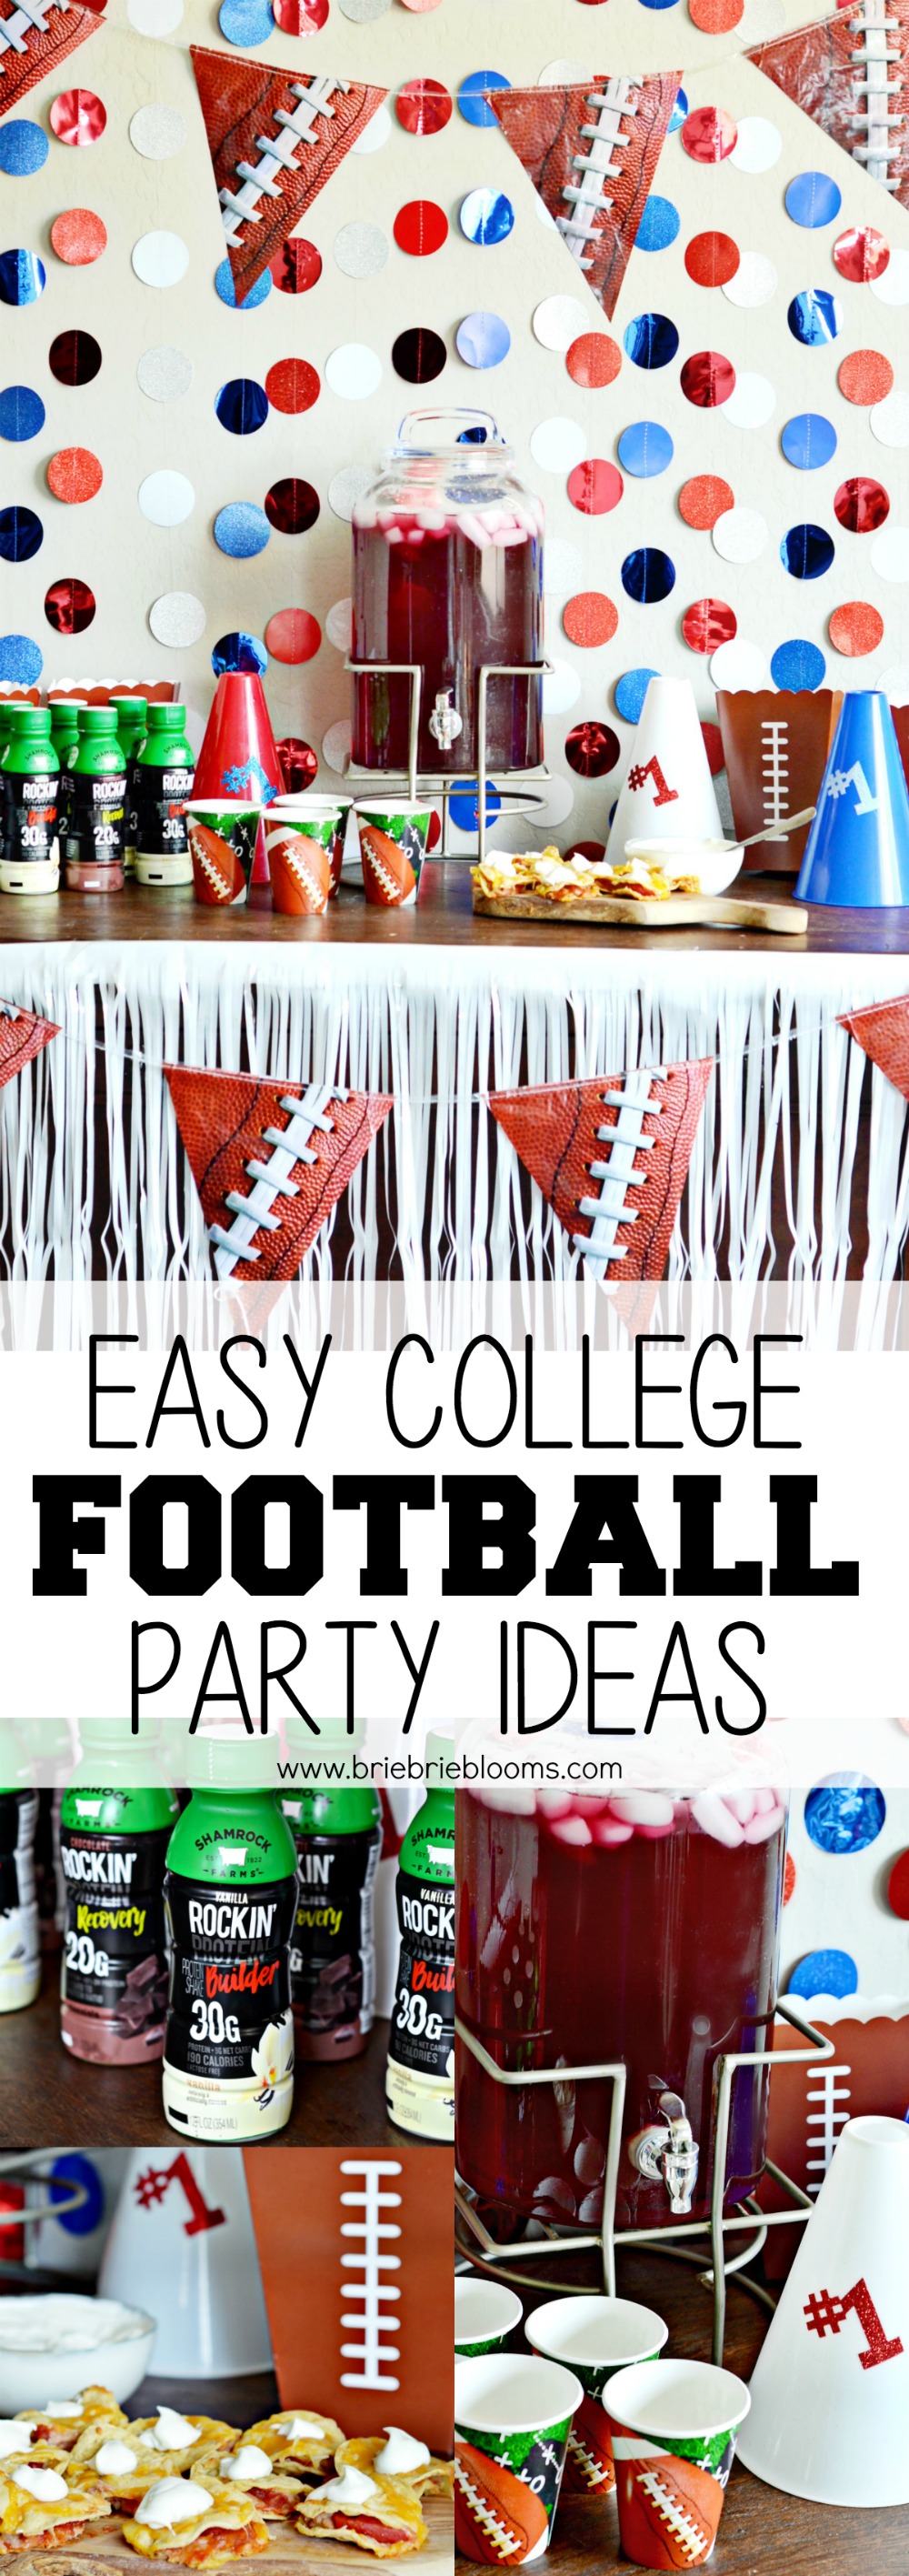 Check out these easy college football party ideas and learn how Shamrock Farms is giving back to the Arizona community through a new partnership with Arizona Athletics and their longtime relationship with UofA.